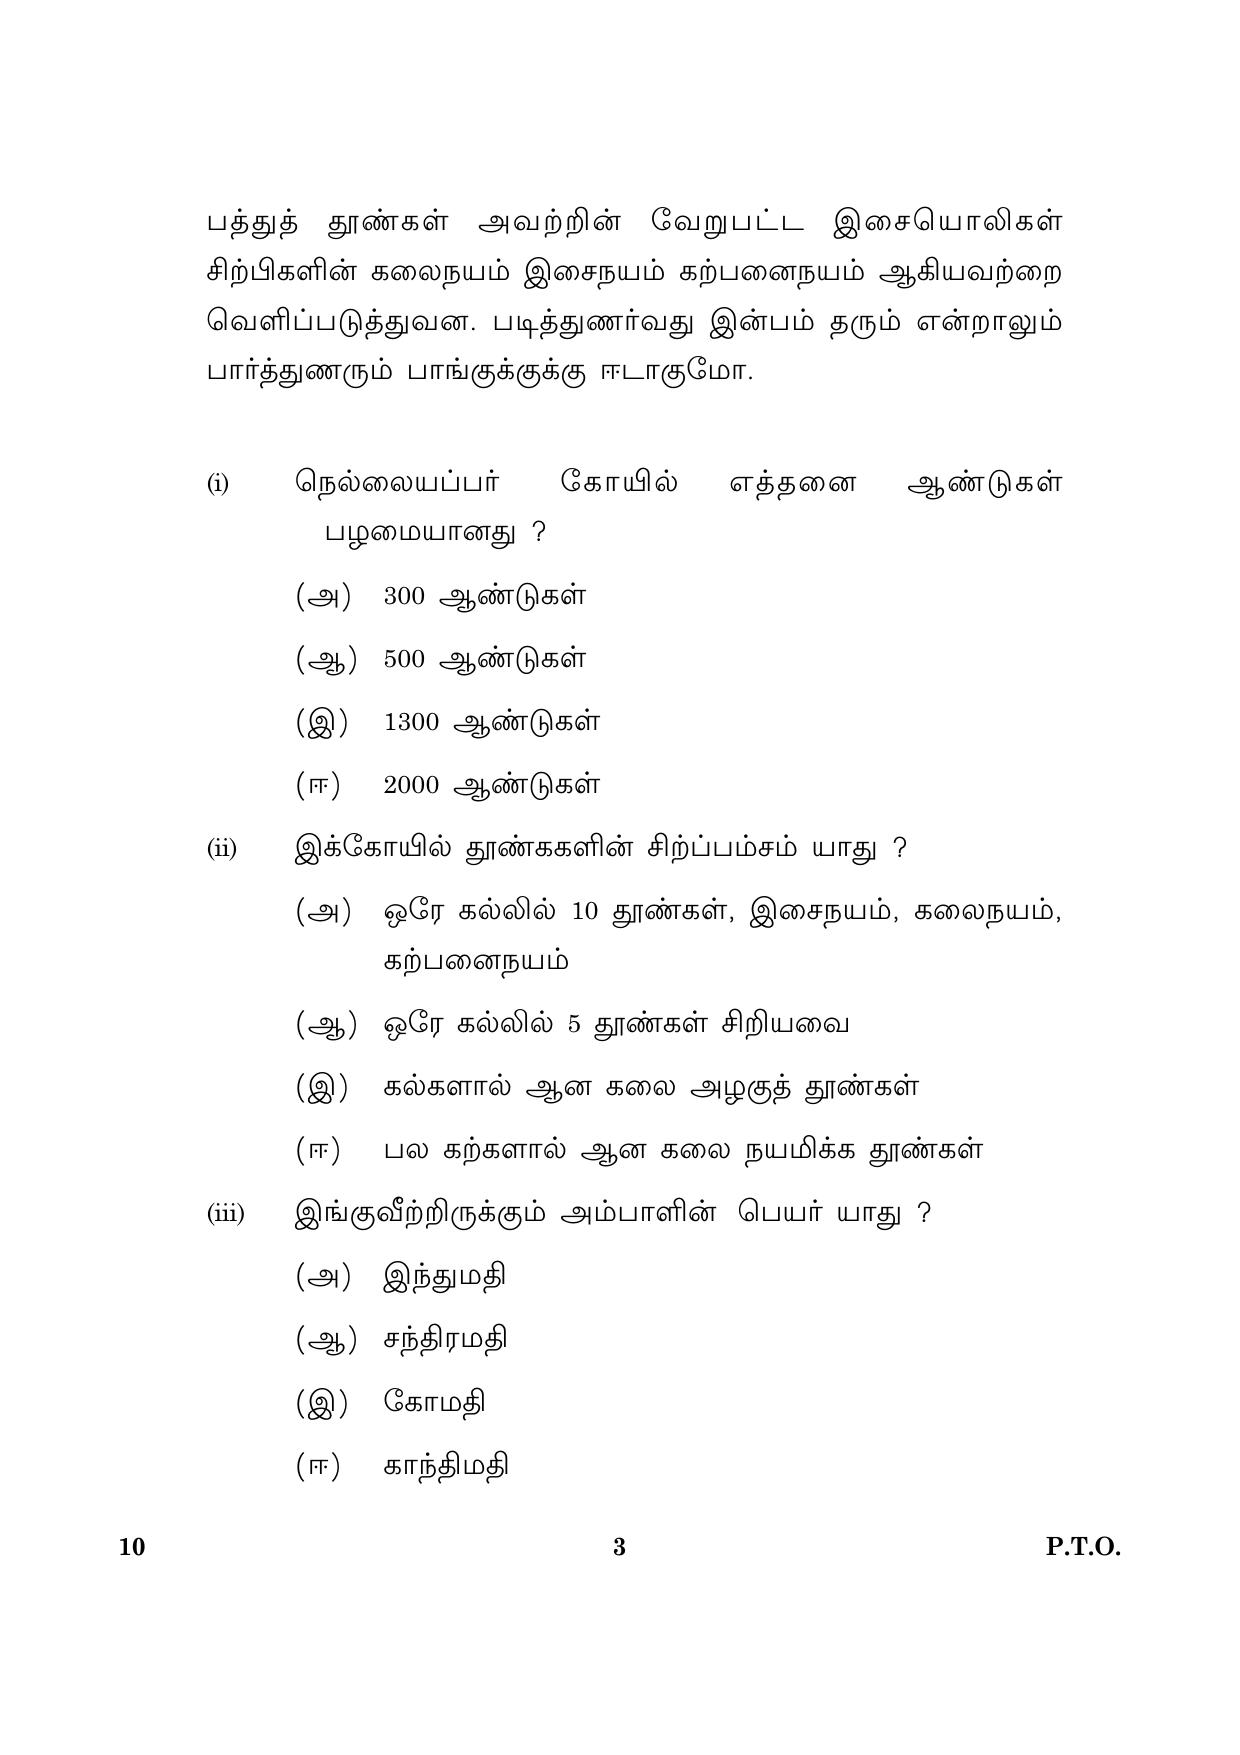 CBSE Class 10 010 Tamil 2016 Question Paper - Page 3